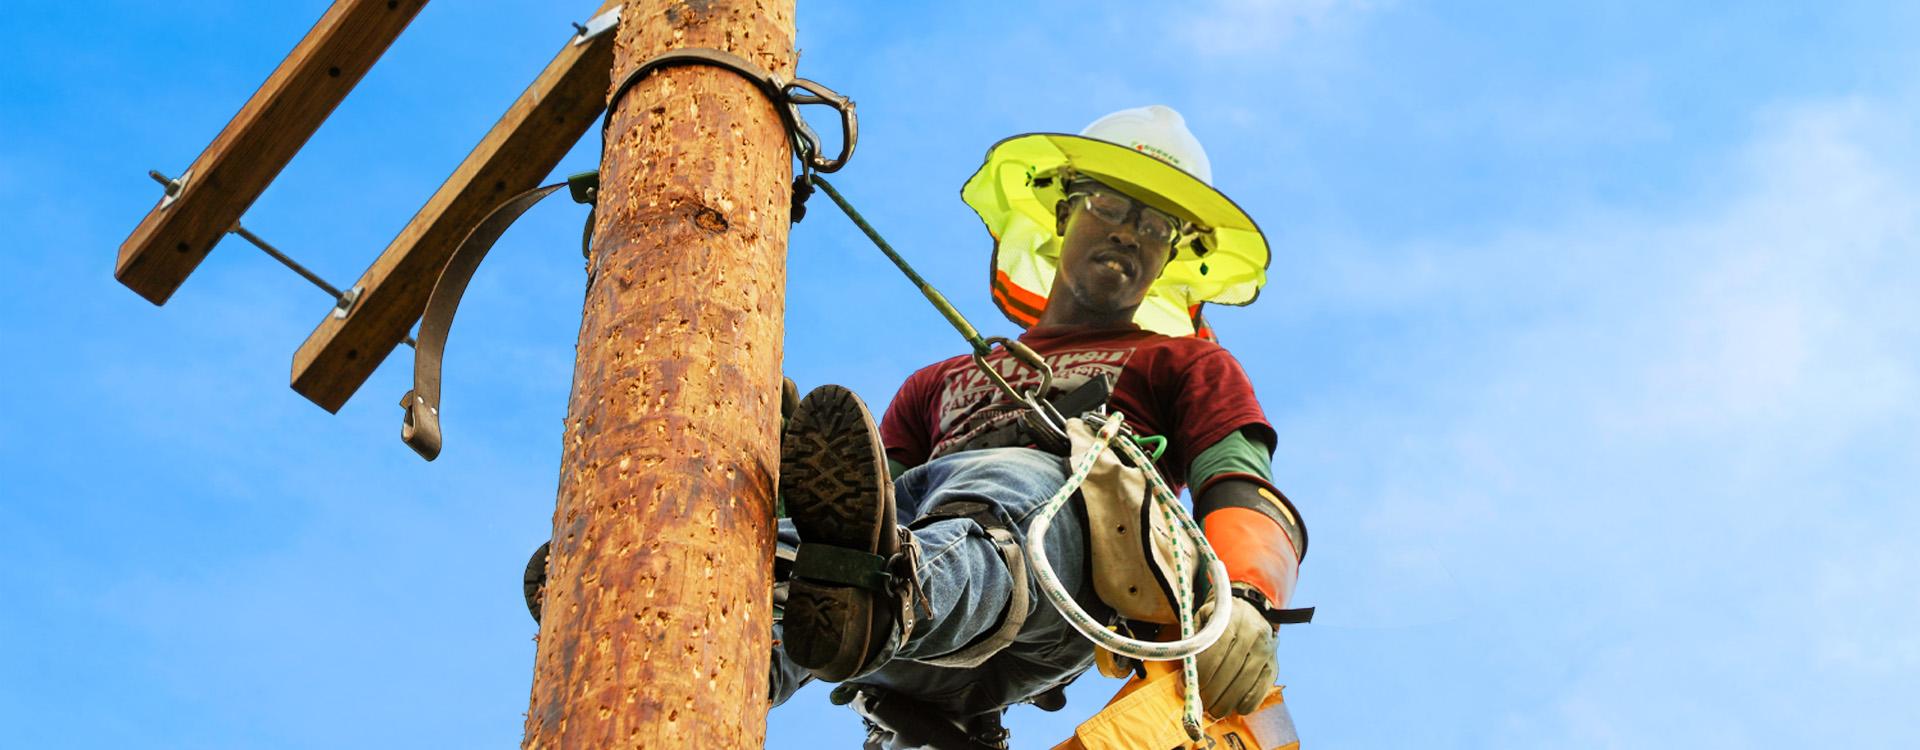 electric line program student in climbing gear at the top of an electric line pole